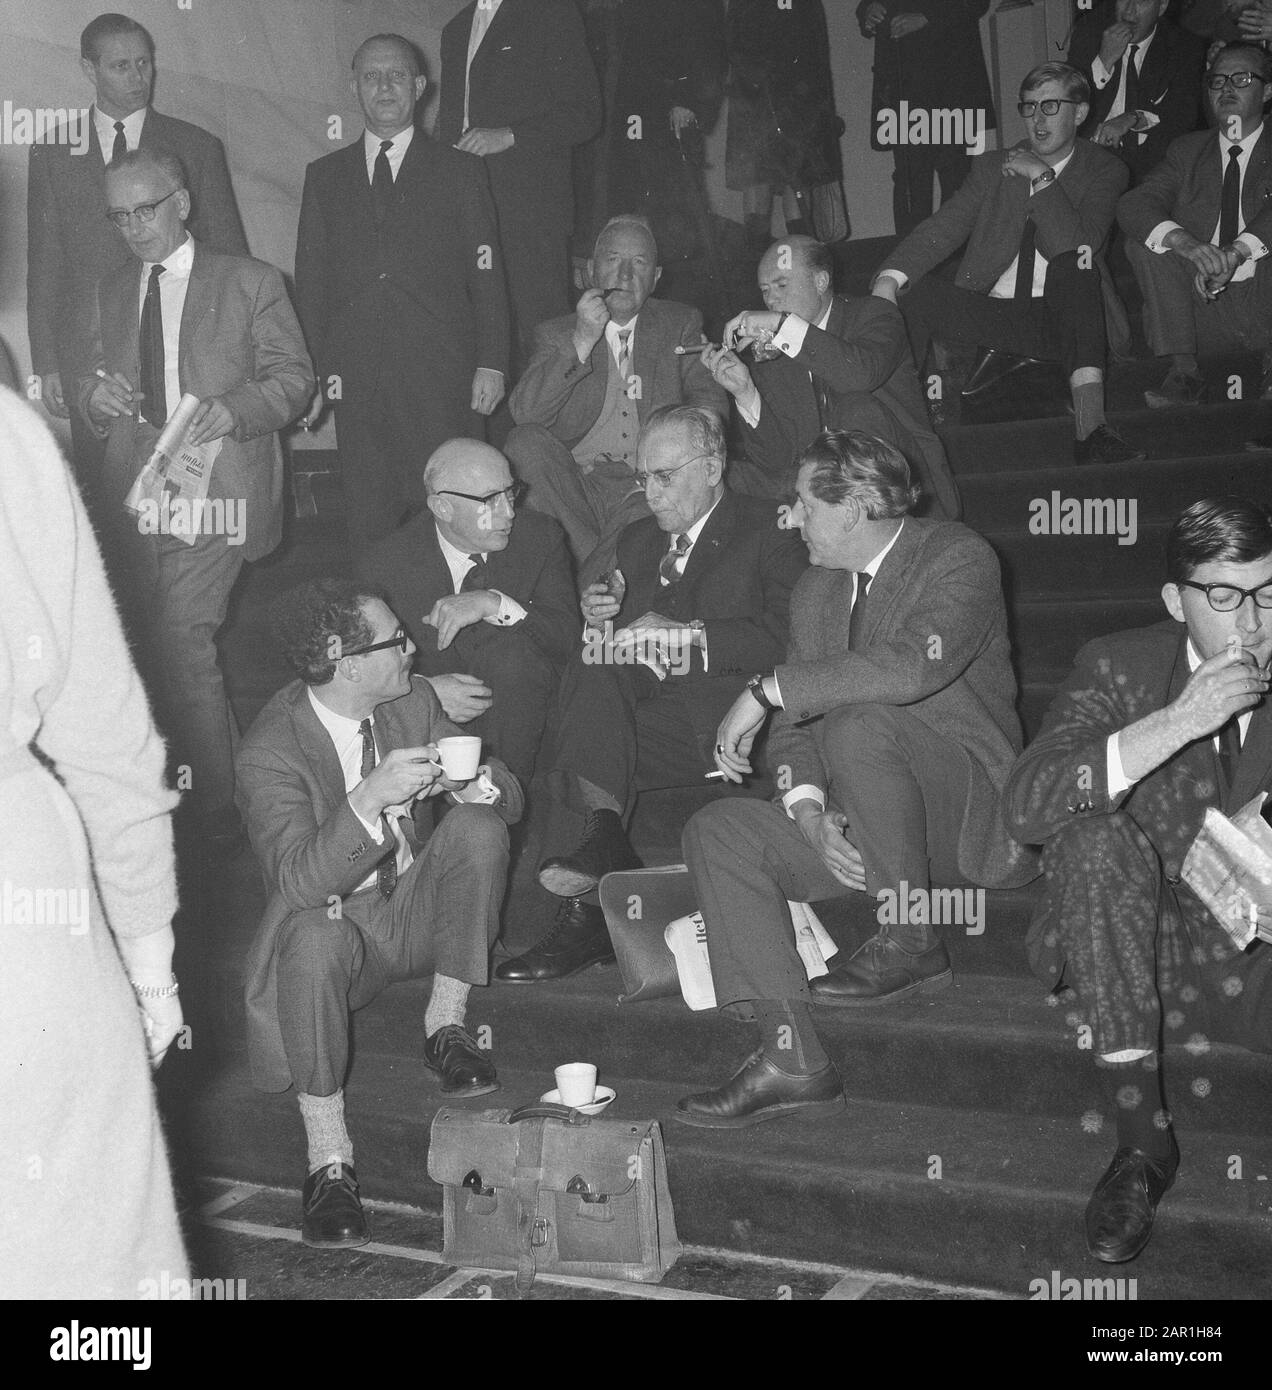 Election Congress of the PvdA in Nijmegen; dr. Drees in conversation with minister Samkalden during lunch Date: November 27, 1965 Location: Nijmegen Keywords: conferences, talks, ministers , political parties Personal name: Drees, Willem, Drees, Willem (sr.), Samkalden, I., Samkalden, Ivo Institution name: PvdA Stock Photo